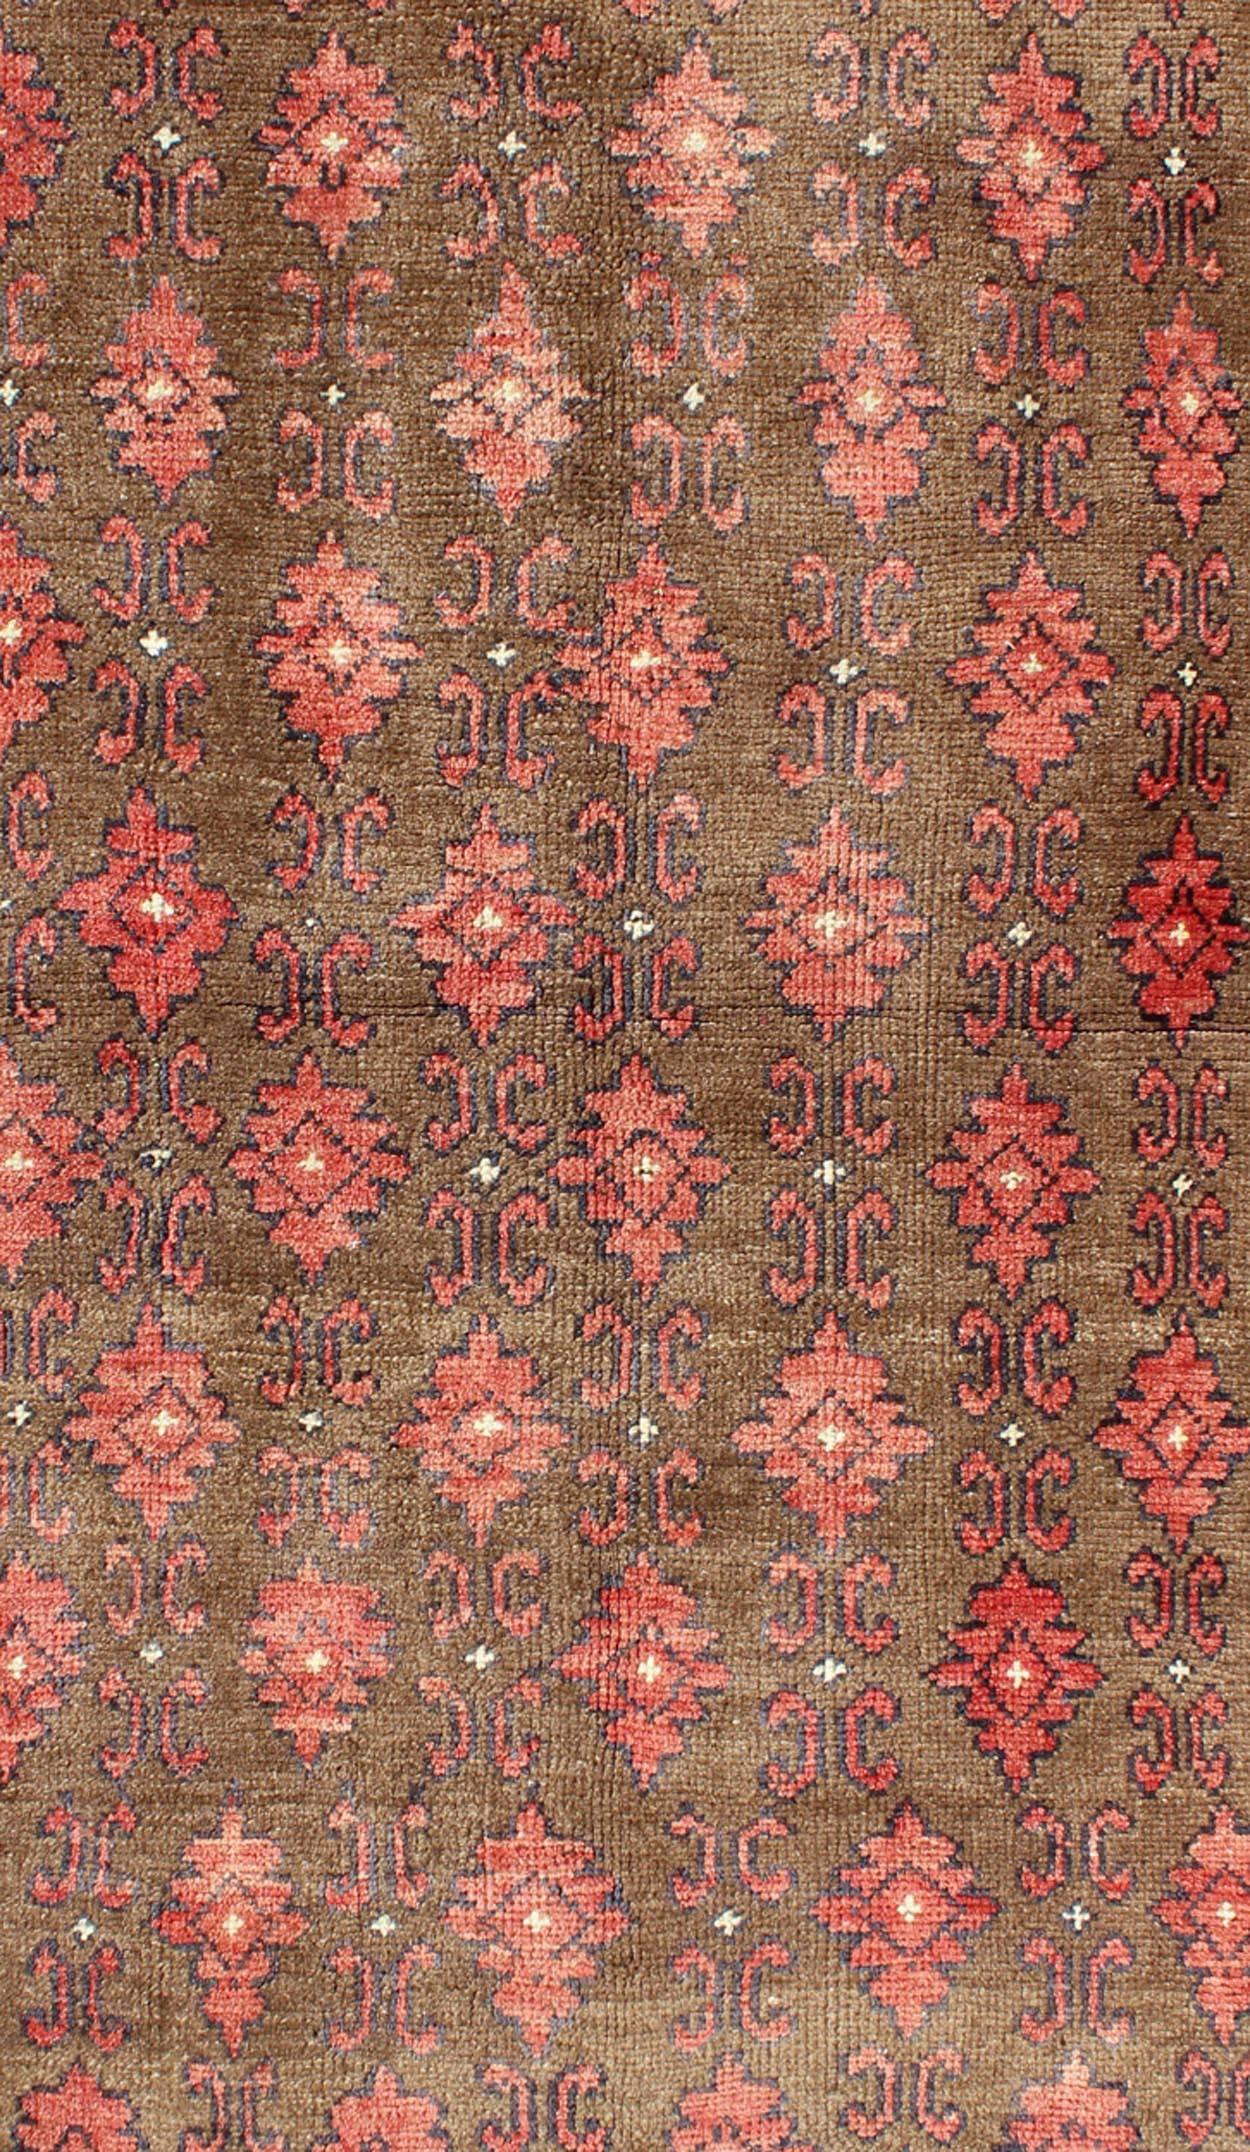 Hand-Knotted Red and Brown Vintage Turkish Oushak Rug with Repeating Vertical Motif Design For Sale